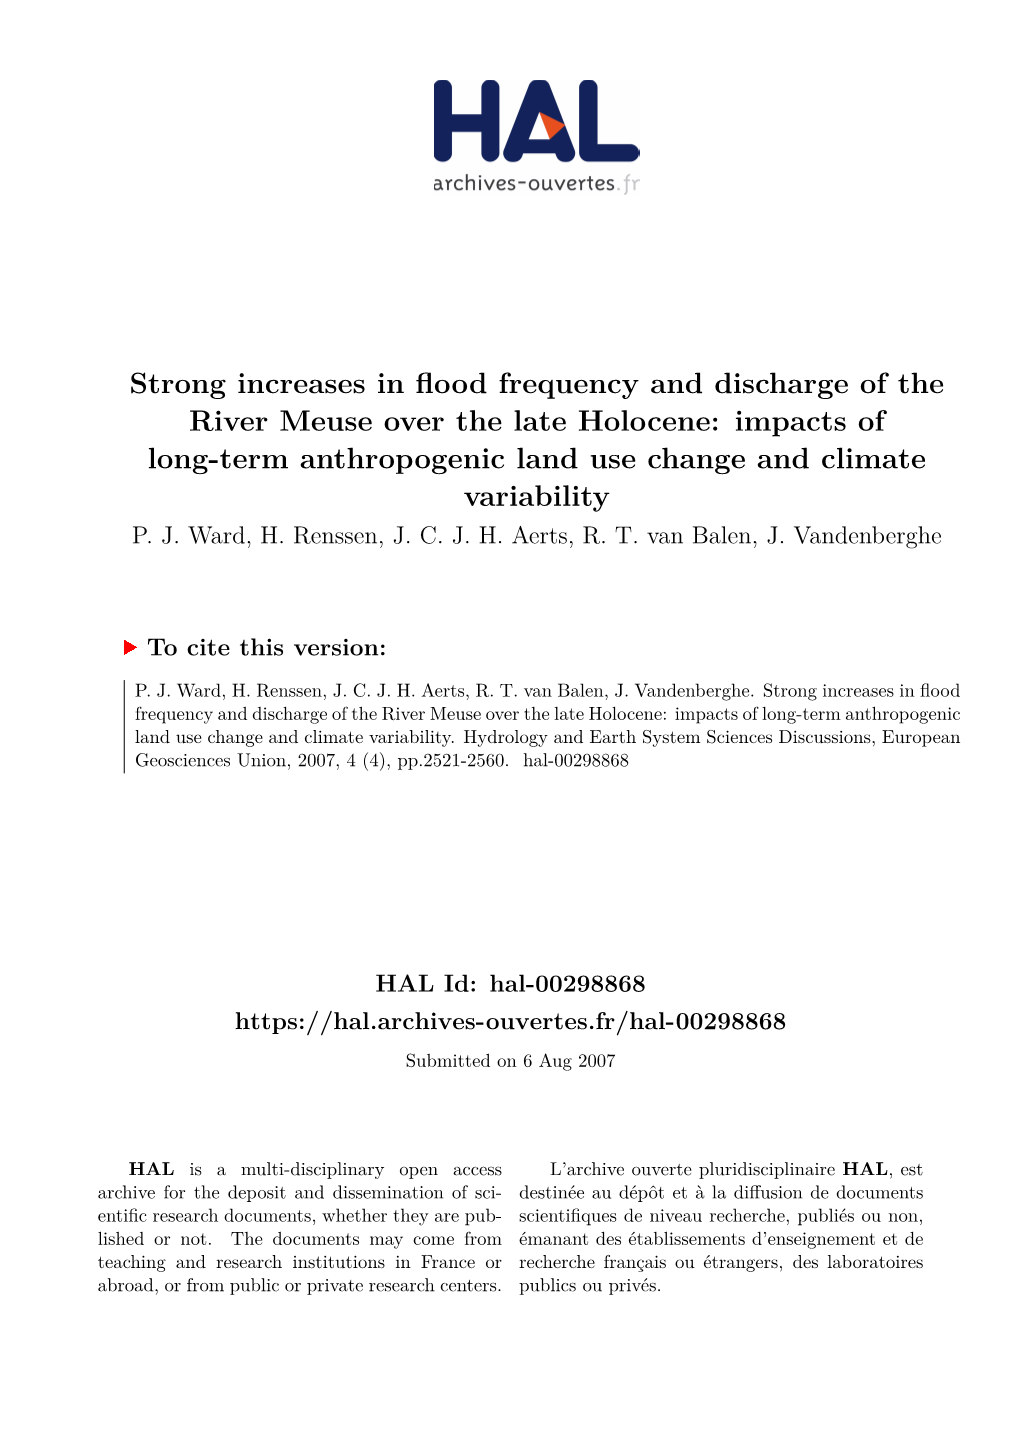 Strong Increases in Flood Frequency and Discharge of the River Meuse